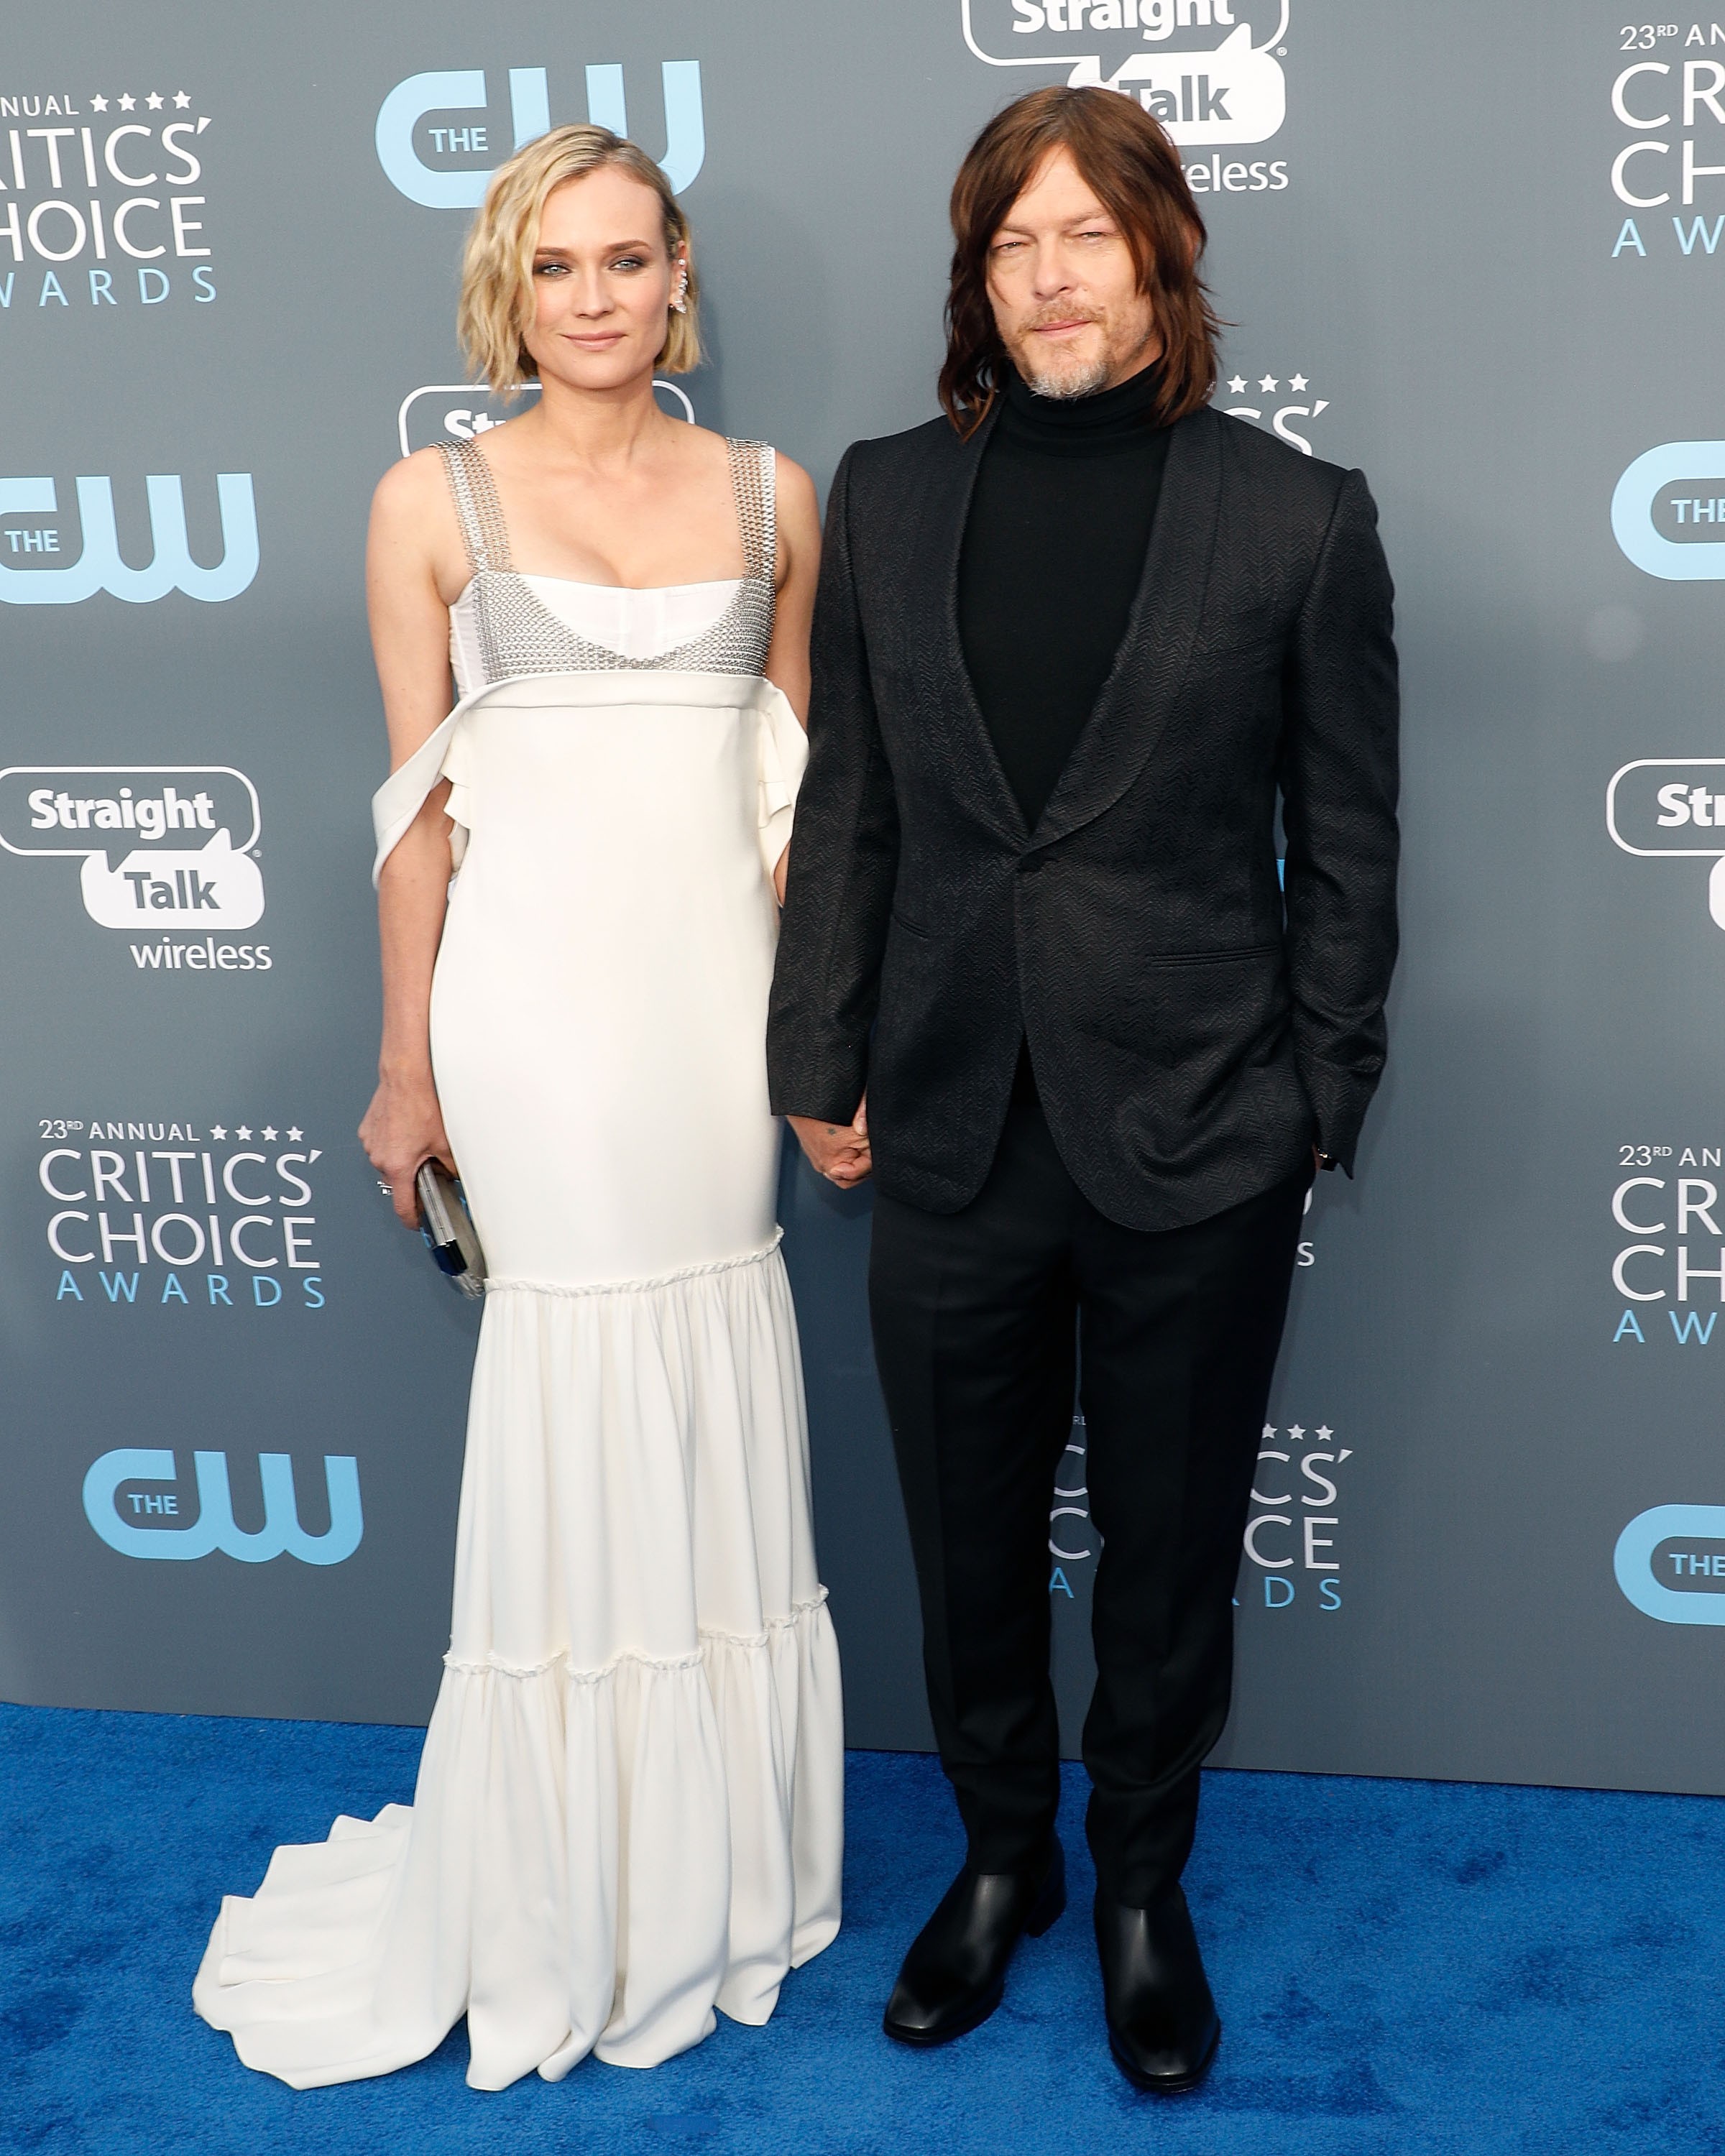 SANTA MONICA, CA - JANUARY 11:  Diane Kruger and Norman Reedus attend the 23rd Annual Critics' Choice Awards at Barker Hangar on January 11, 2018 in Santa Monica, California.  (Photo by Taylor Hill/Getty Images) (Foto: Getty Images)